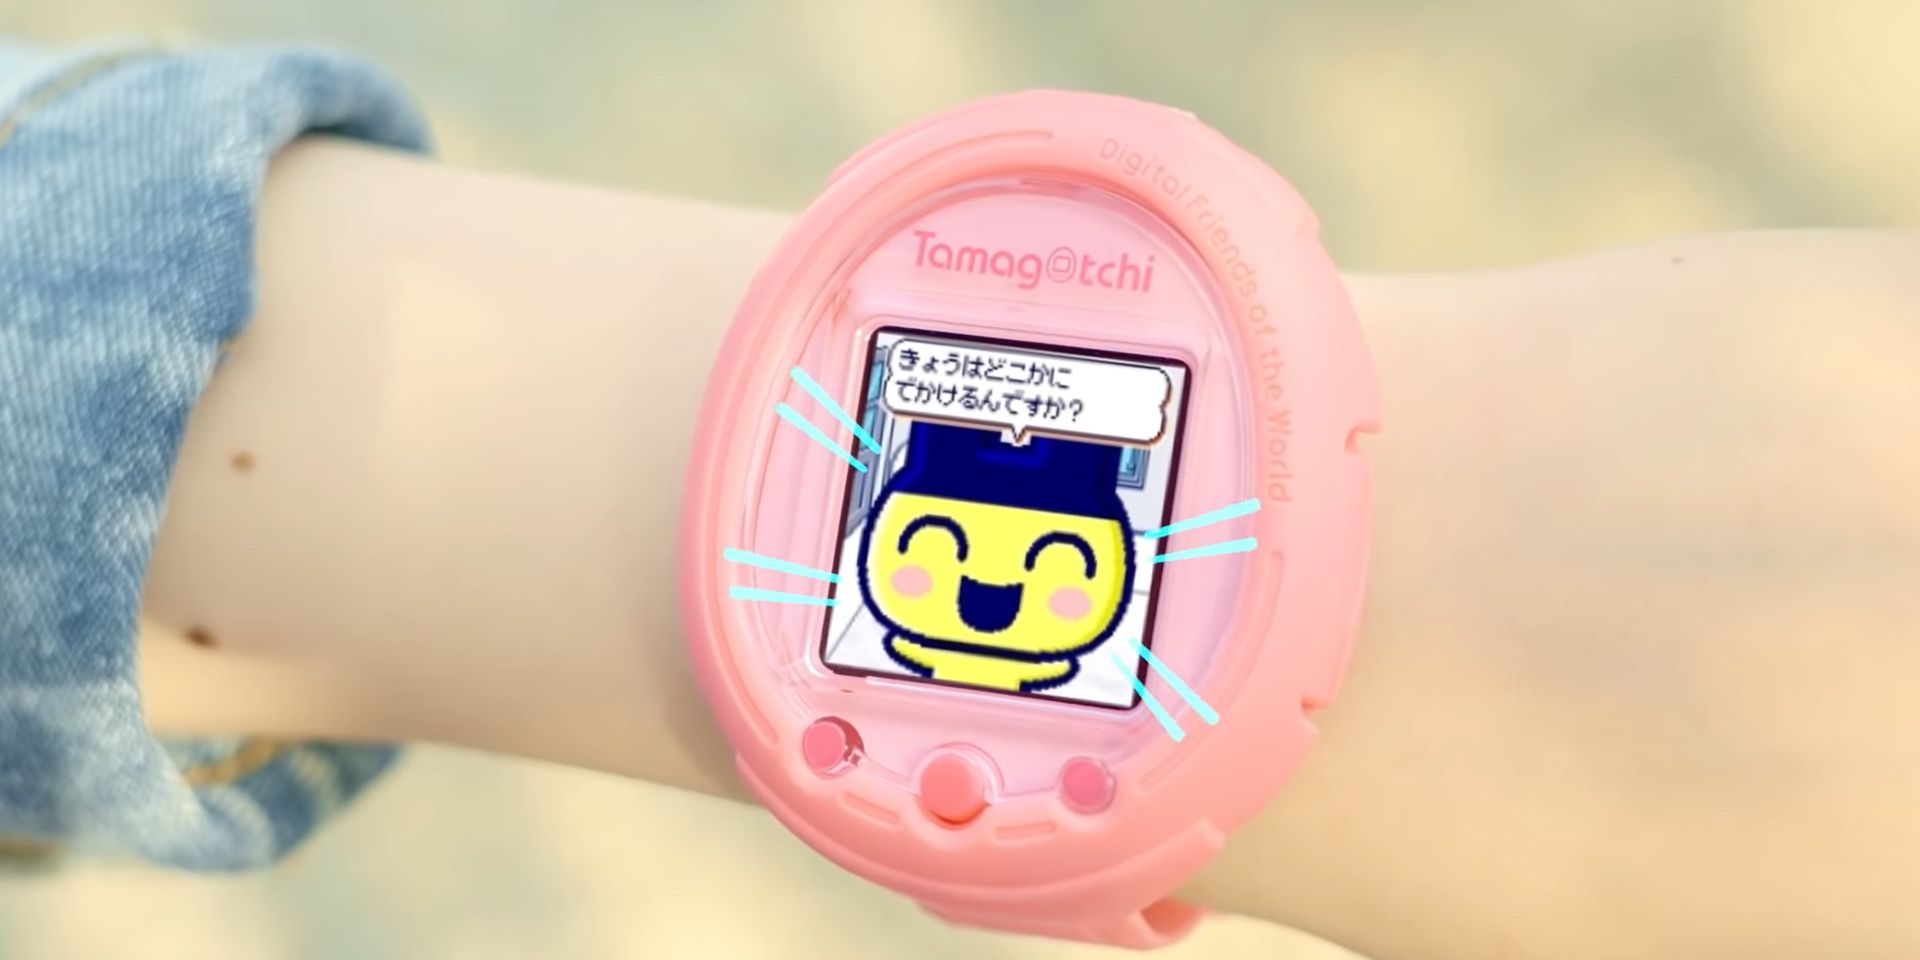 Tamagotchi is back!  Combines virtual animals with a smartwatch